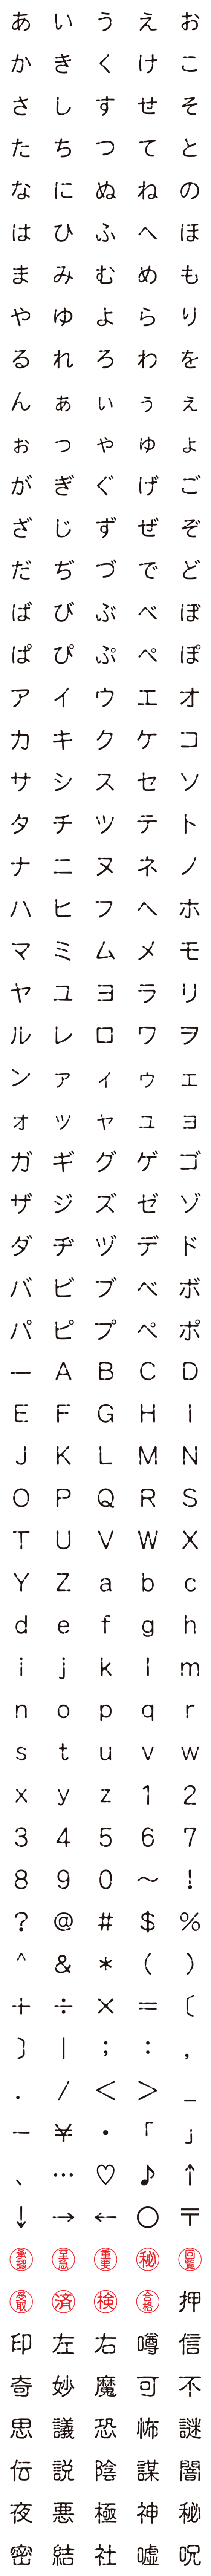 [LINE絵文字]DF康印体 フォント絵文字の画像一覧